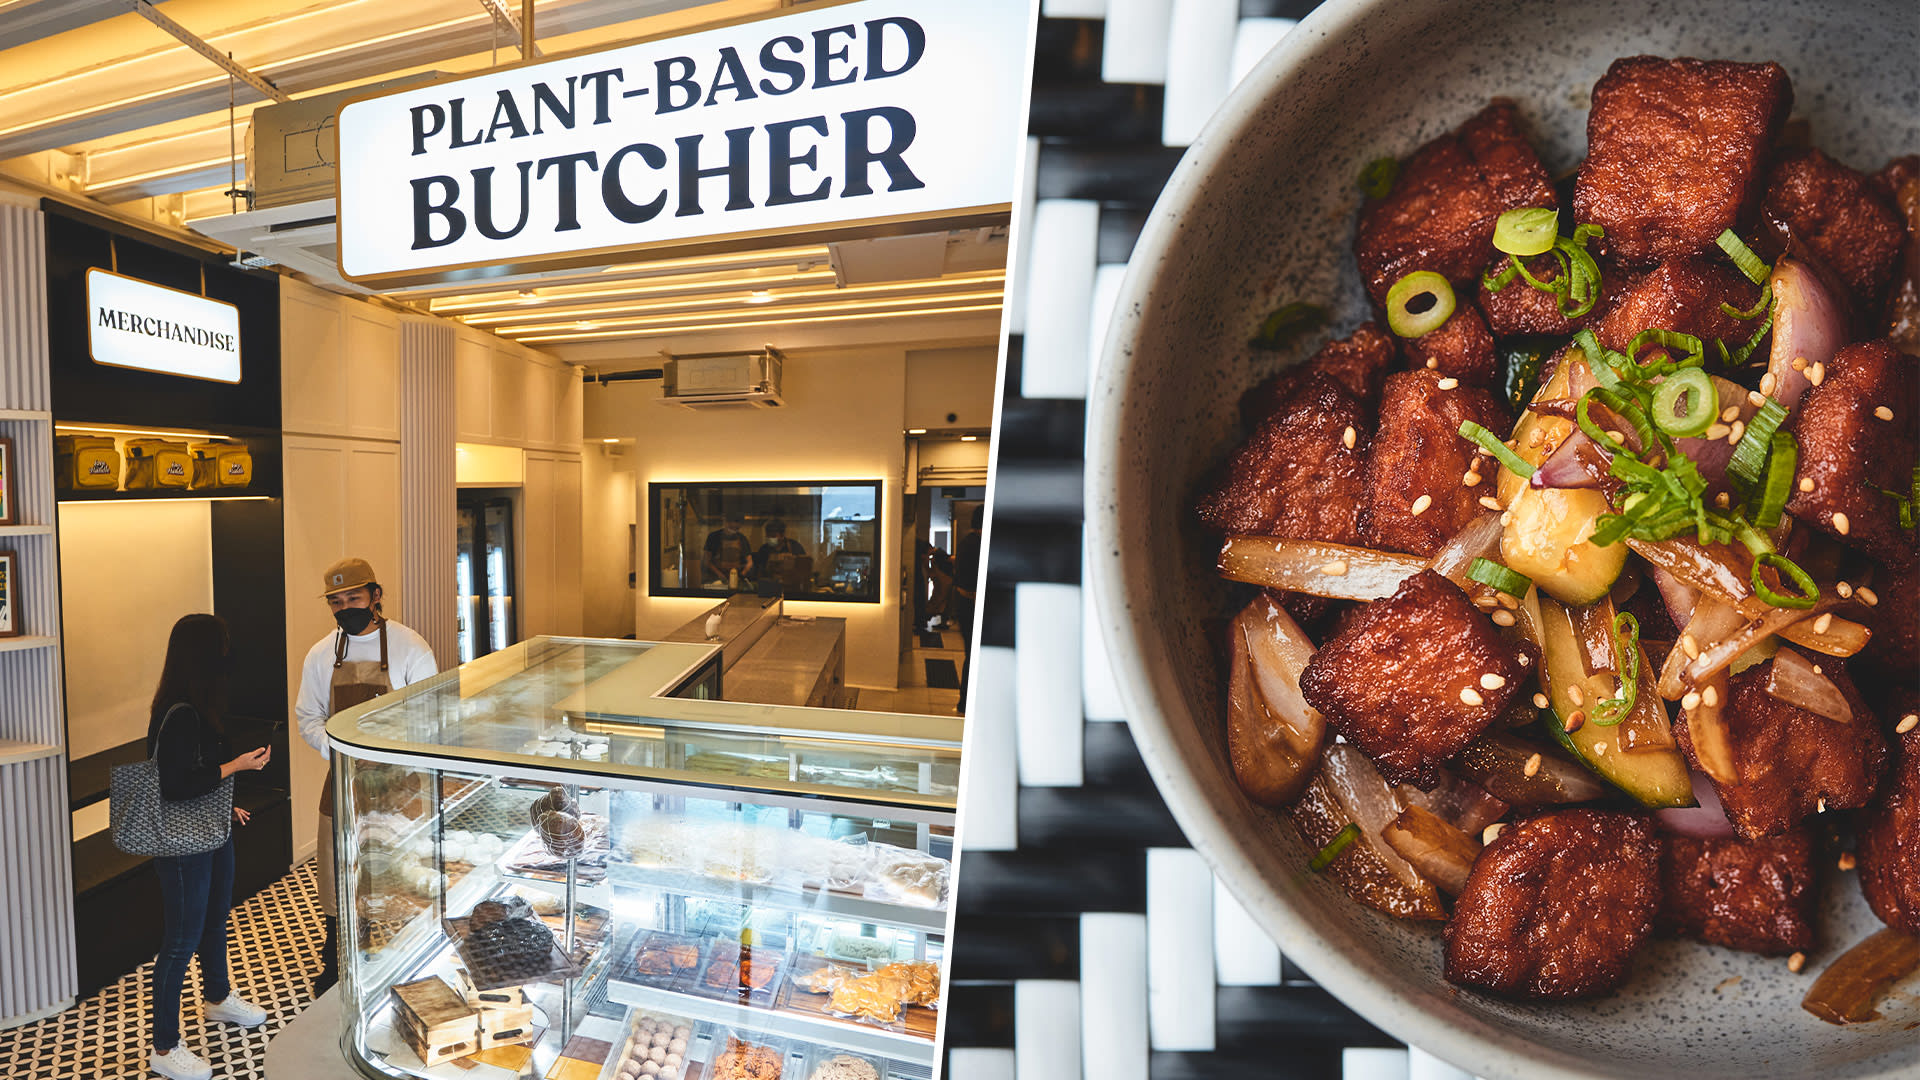 “Mom’s Luncheon Meat” & “Chicken” Mee Sua Served At S’pore’s First Vegan Butchery-Cafe